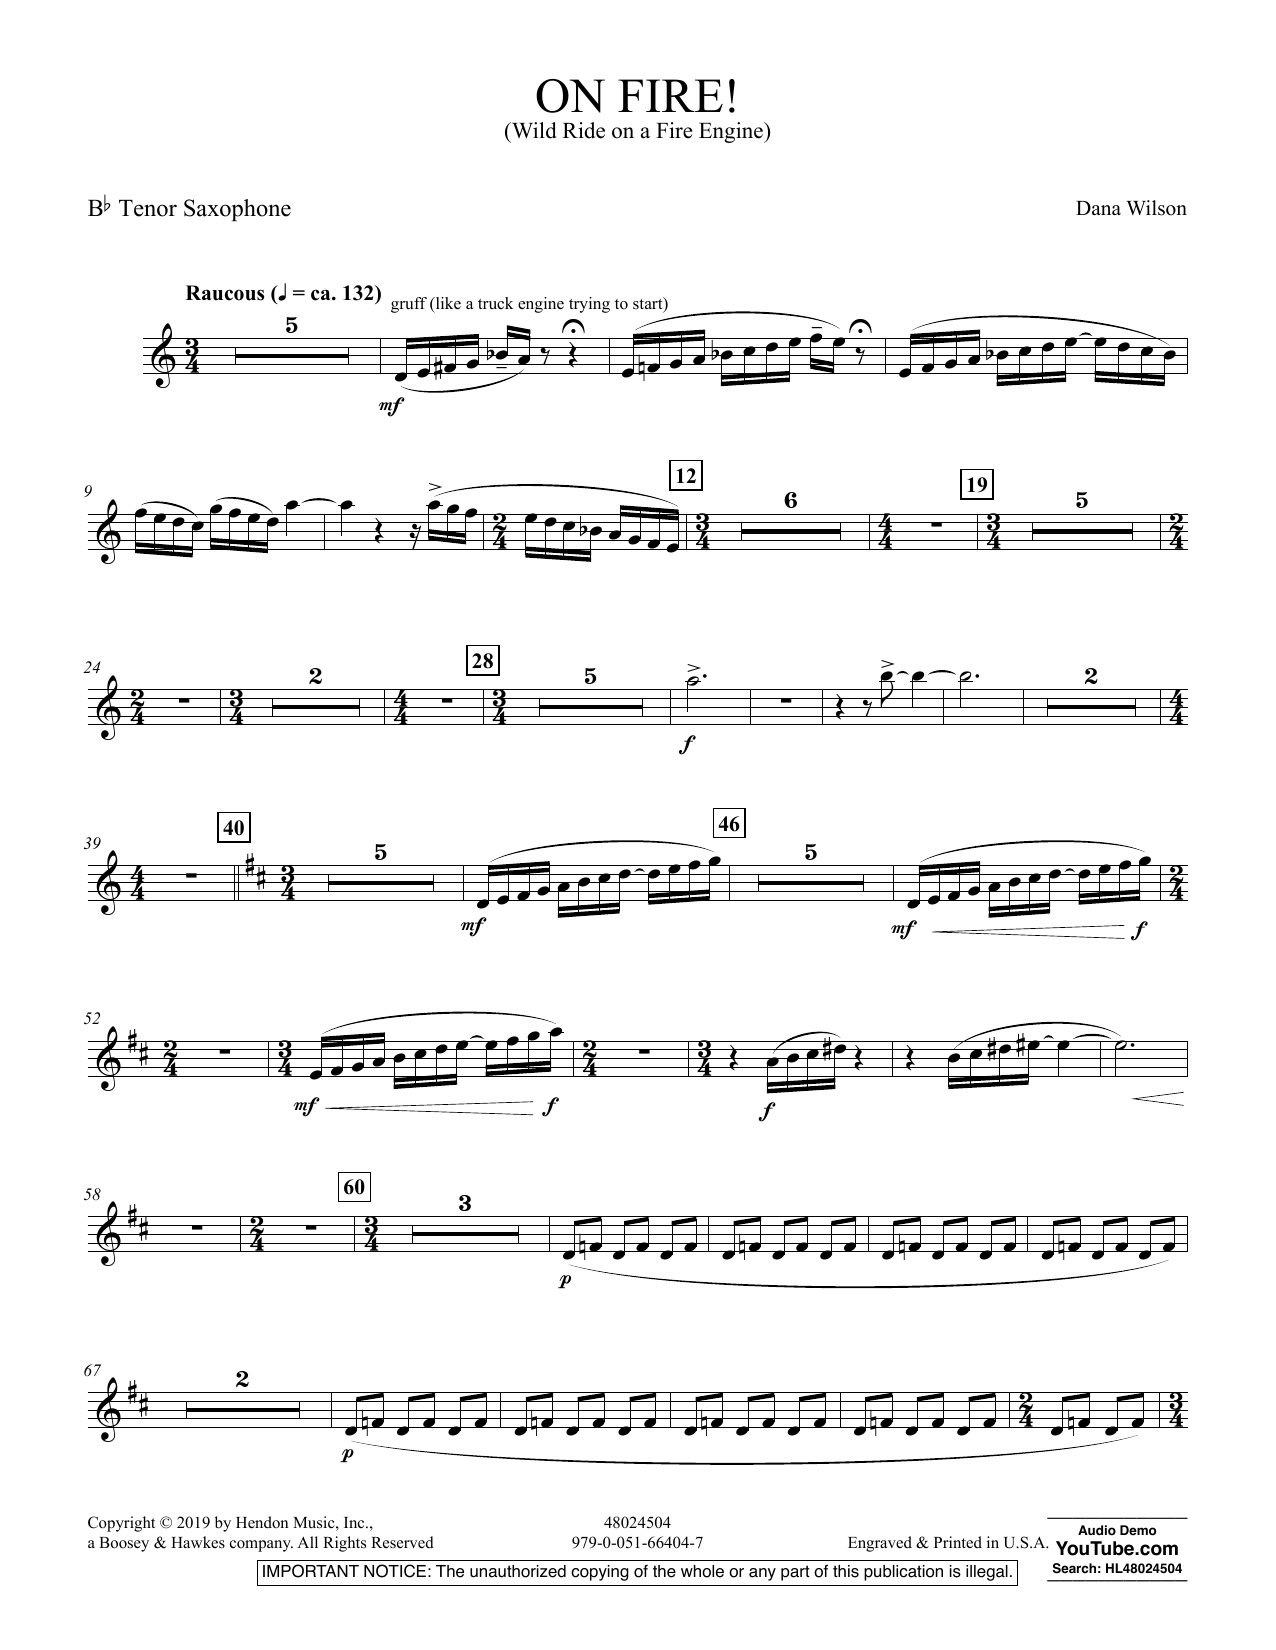 Dana Wilson On Fire! (Wild Ride on a Fire Engine) - Bb Tenor Saxophone sheet music preview music notes and score for Concert Band including 2 page(s)